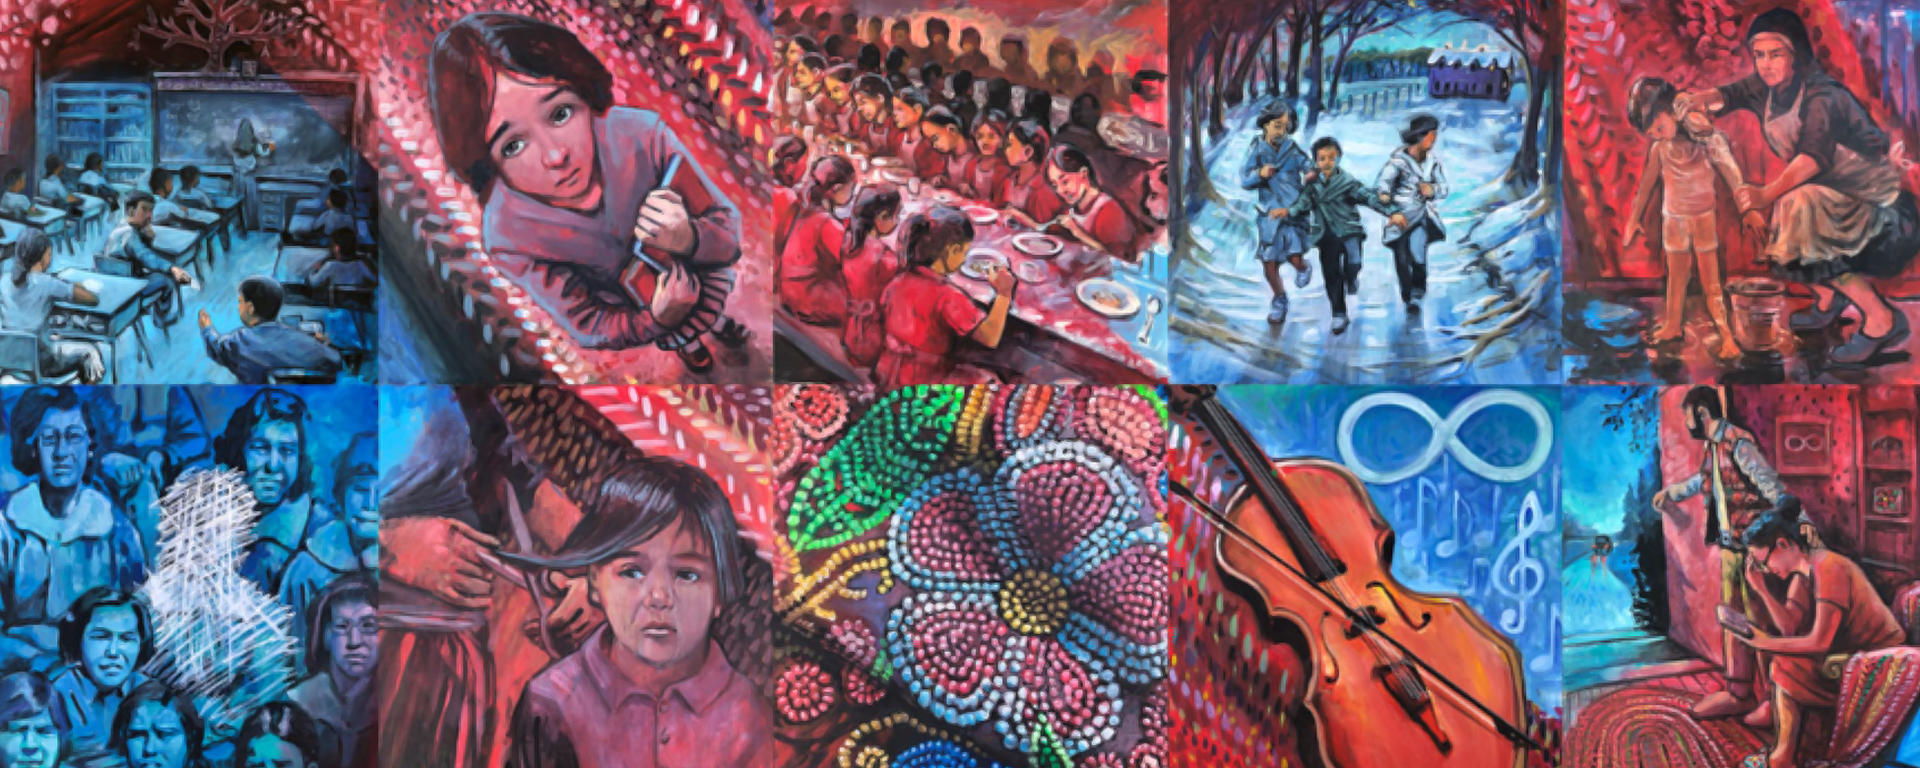 The Métis Memories of Residential Schools, A Testament to the Strength of the Métis mural mosaic honours the unique experiences of Métis survivors of Canada’s Residential School System  